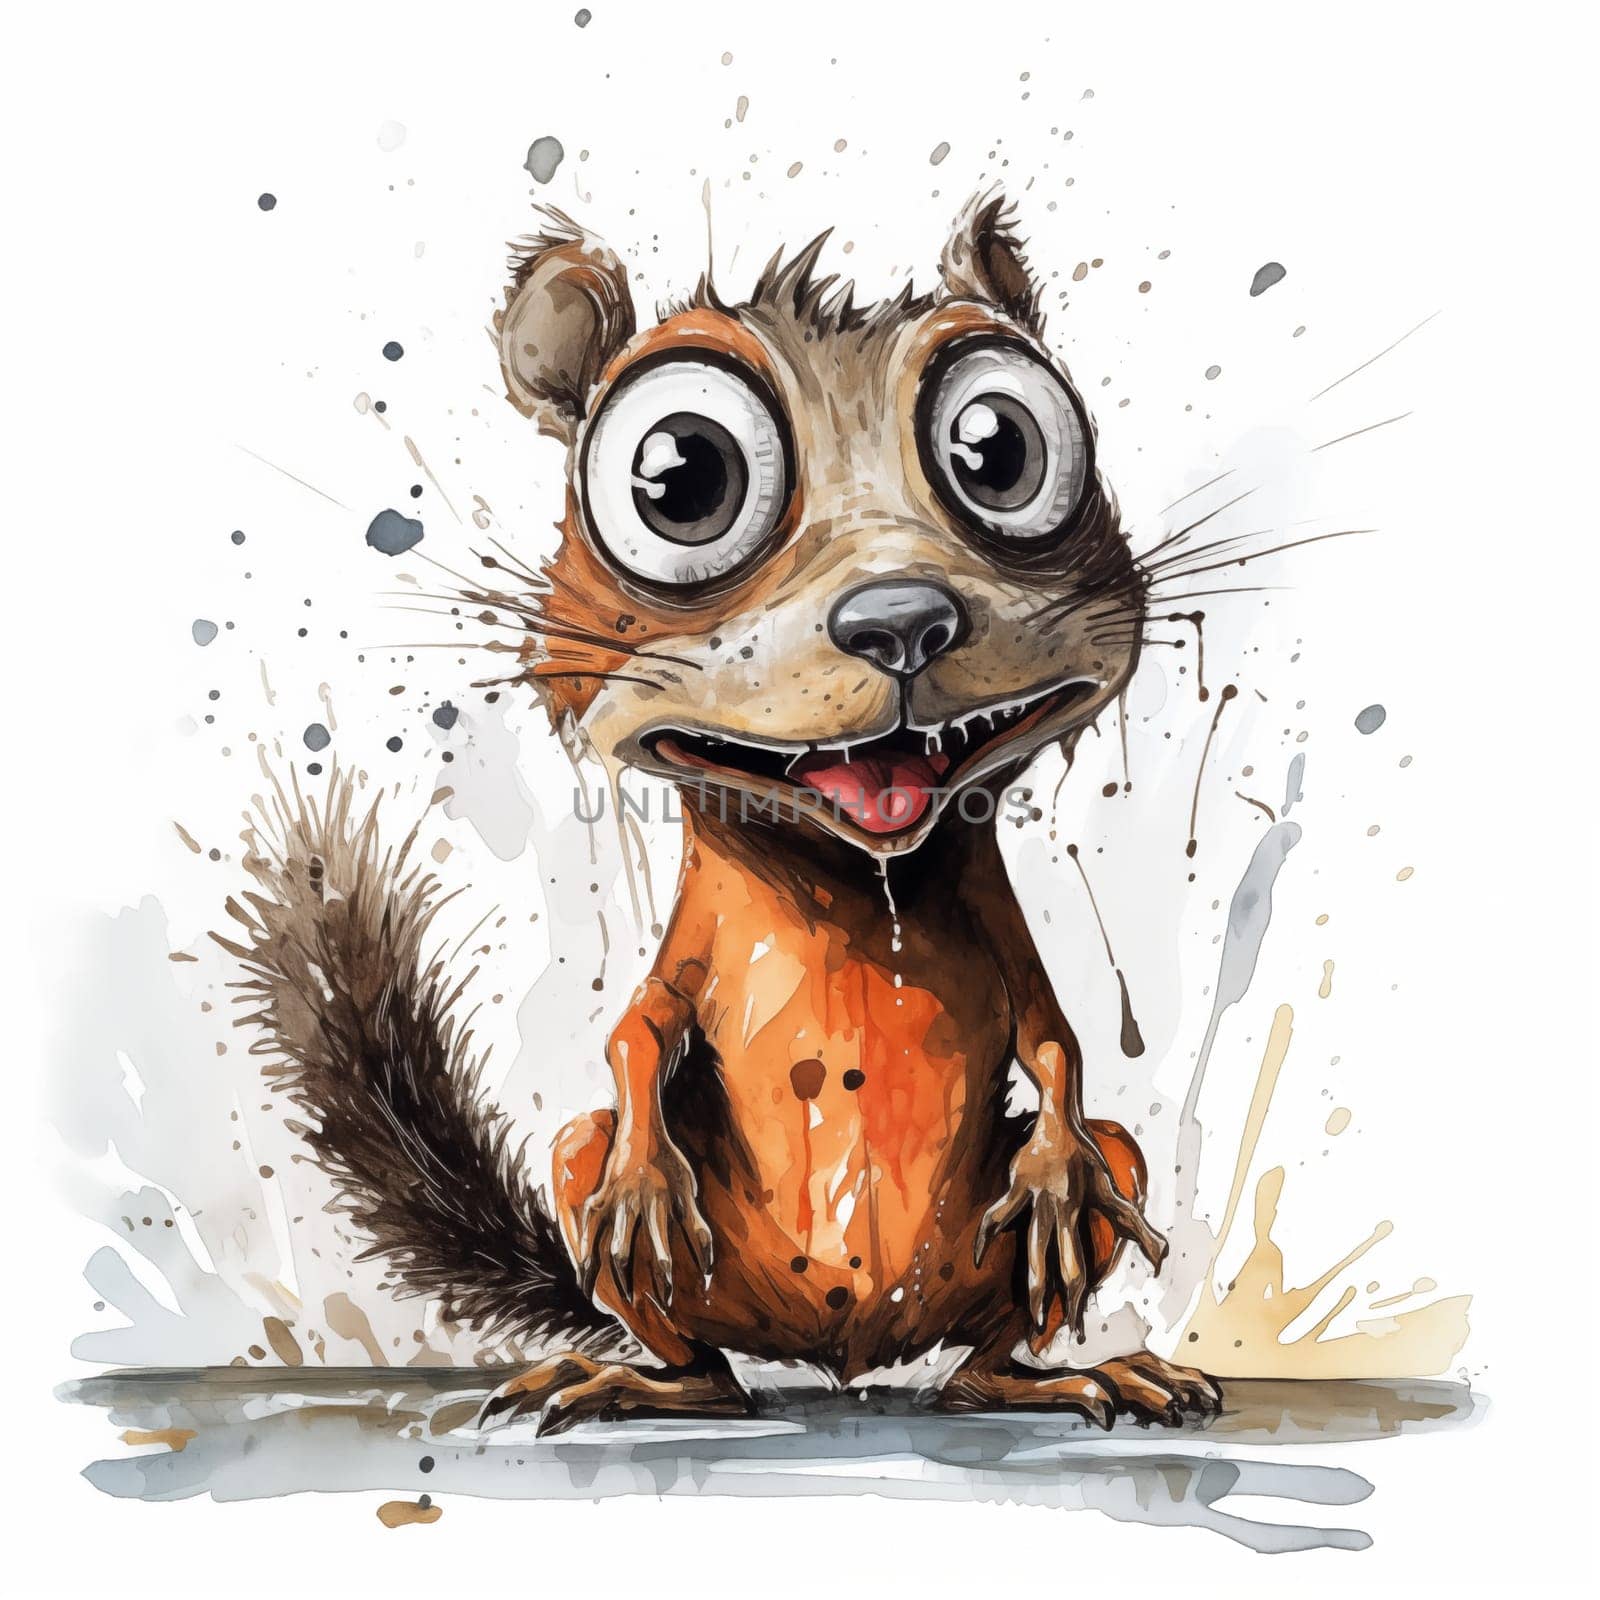 drawing of a frightened squirrel with big eyes. High quality photo